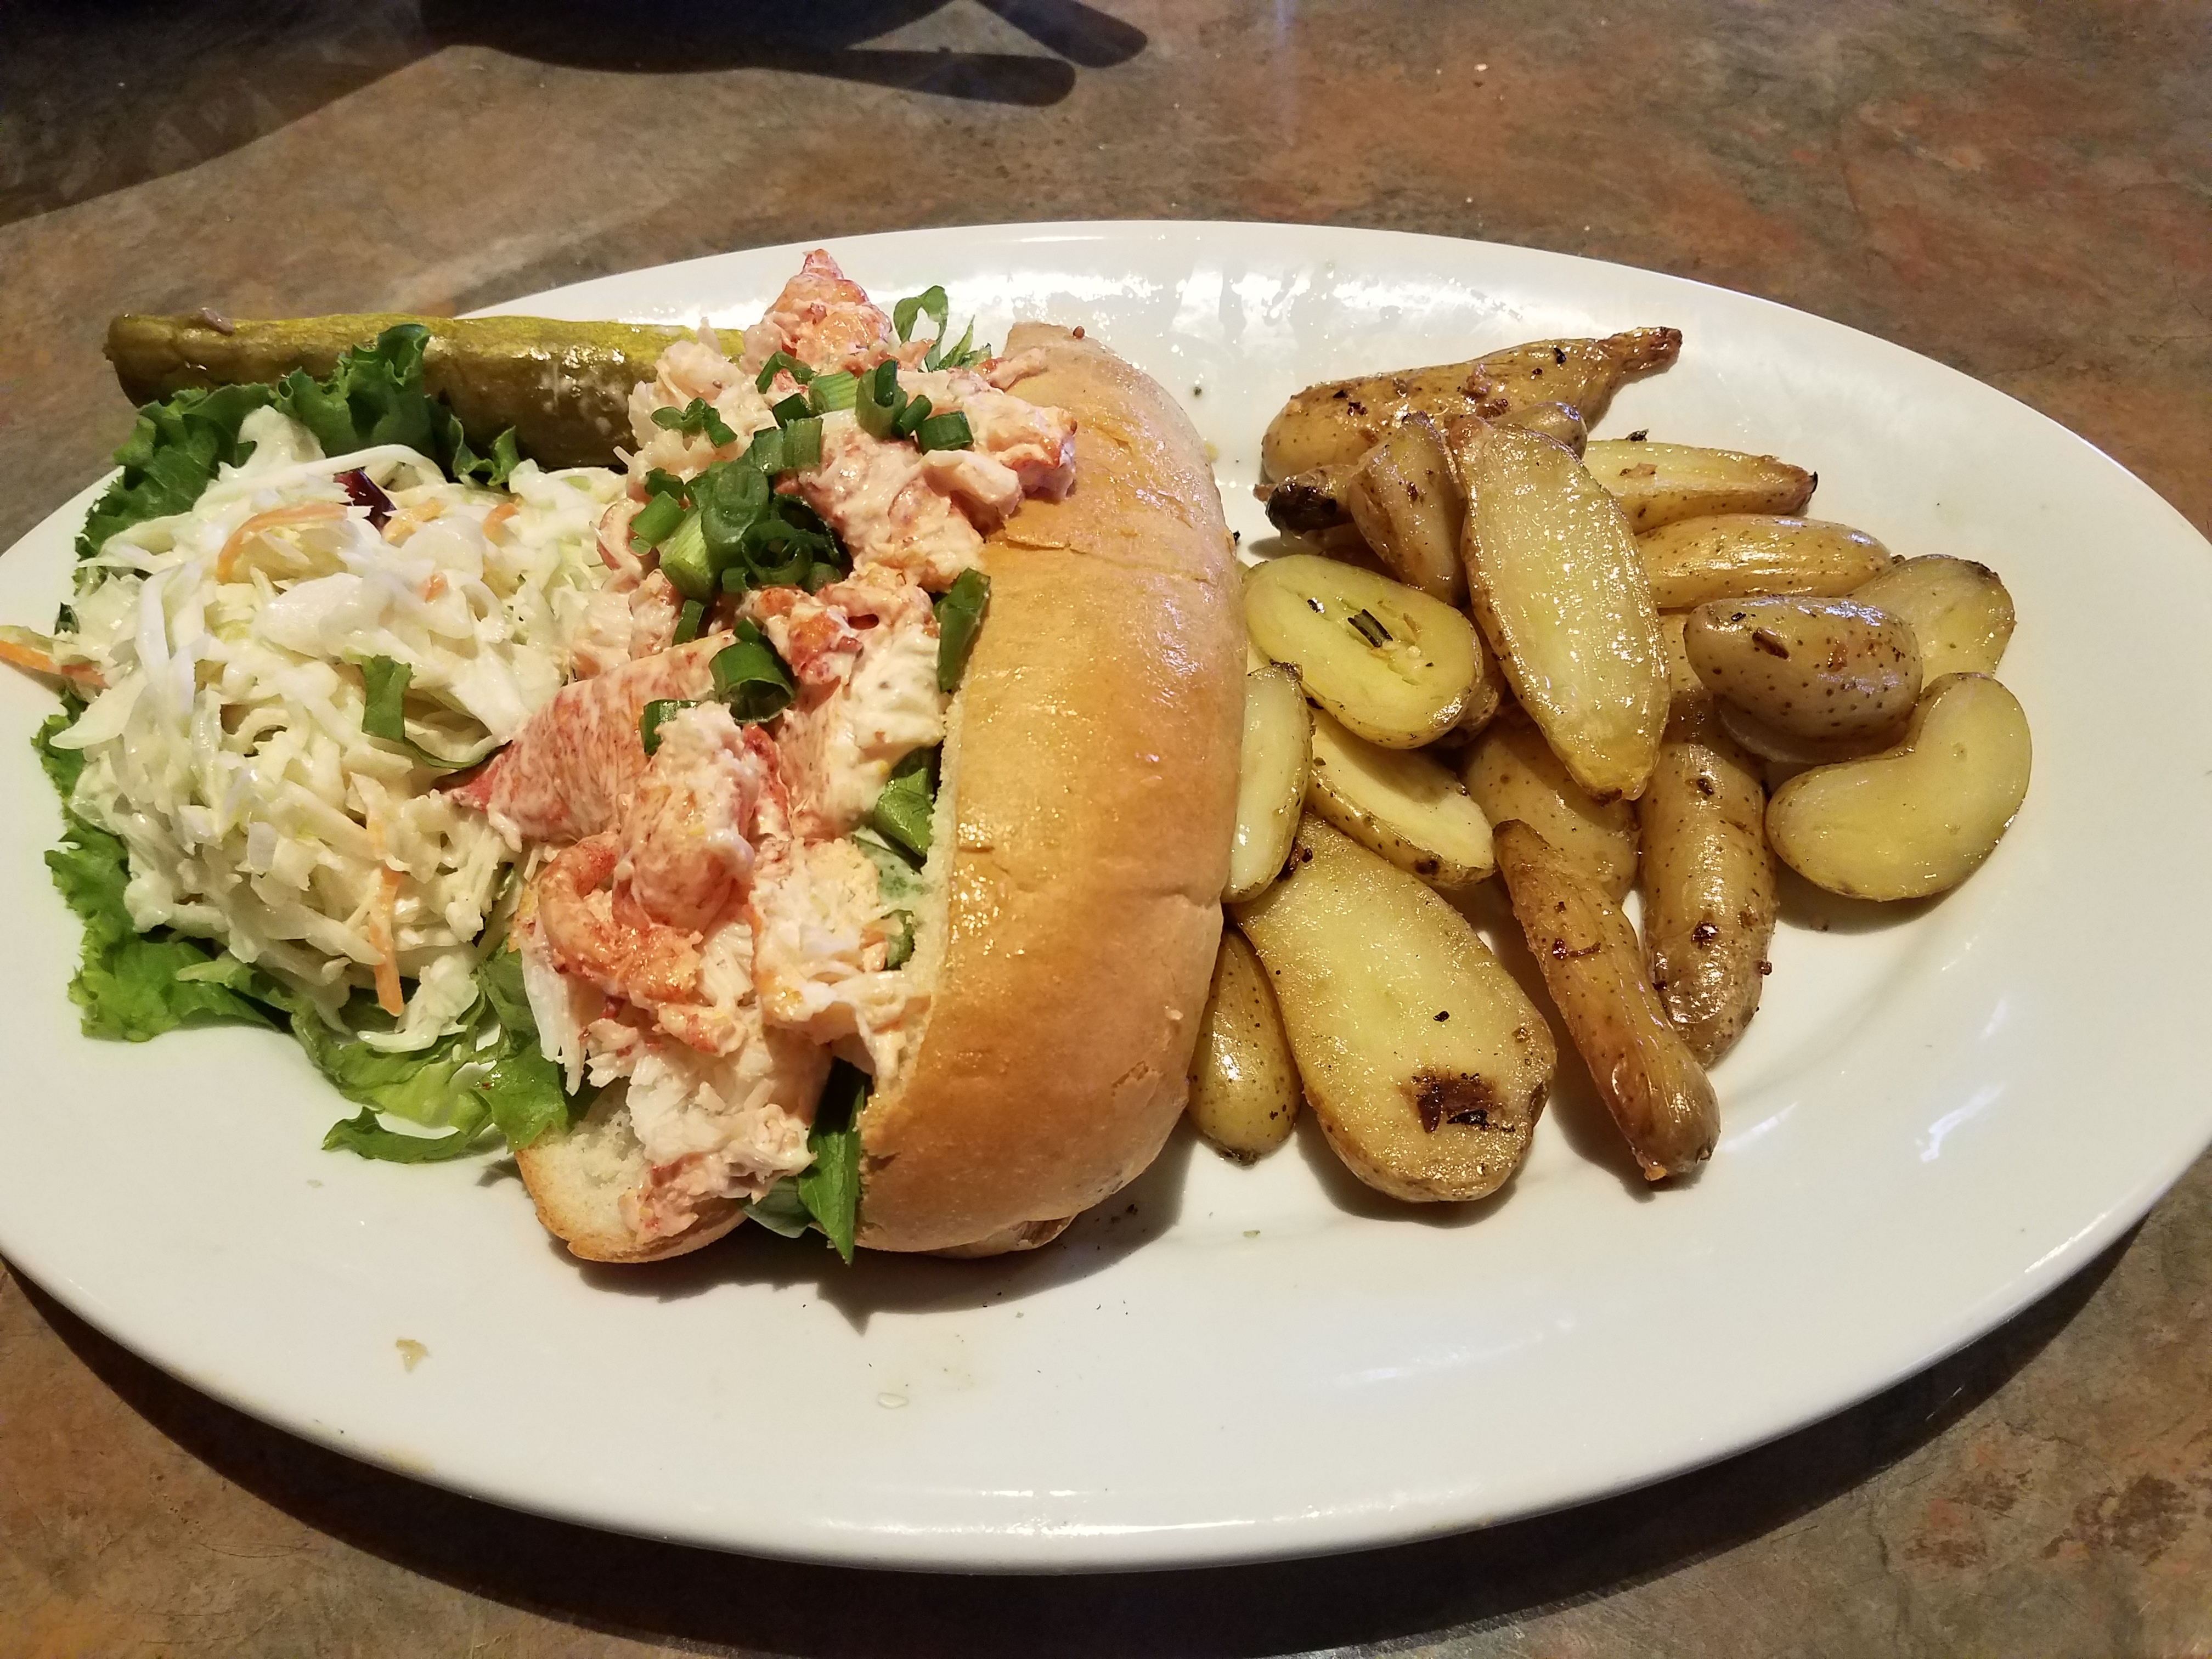 Lombard's Lobster Roll at Lombard's Seafood Grille in Universal Studios Orlando by unofficialuniversal.com